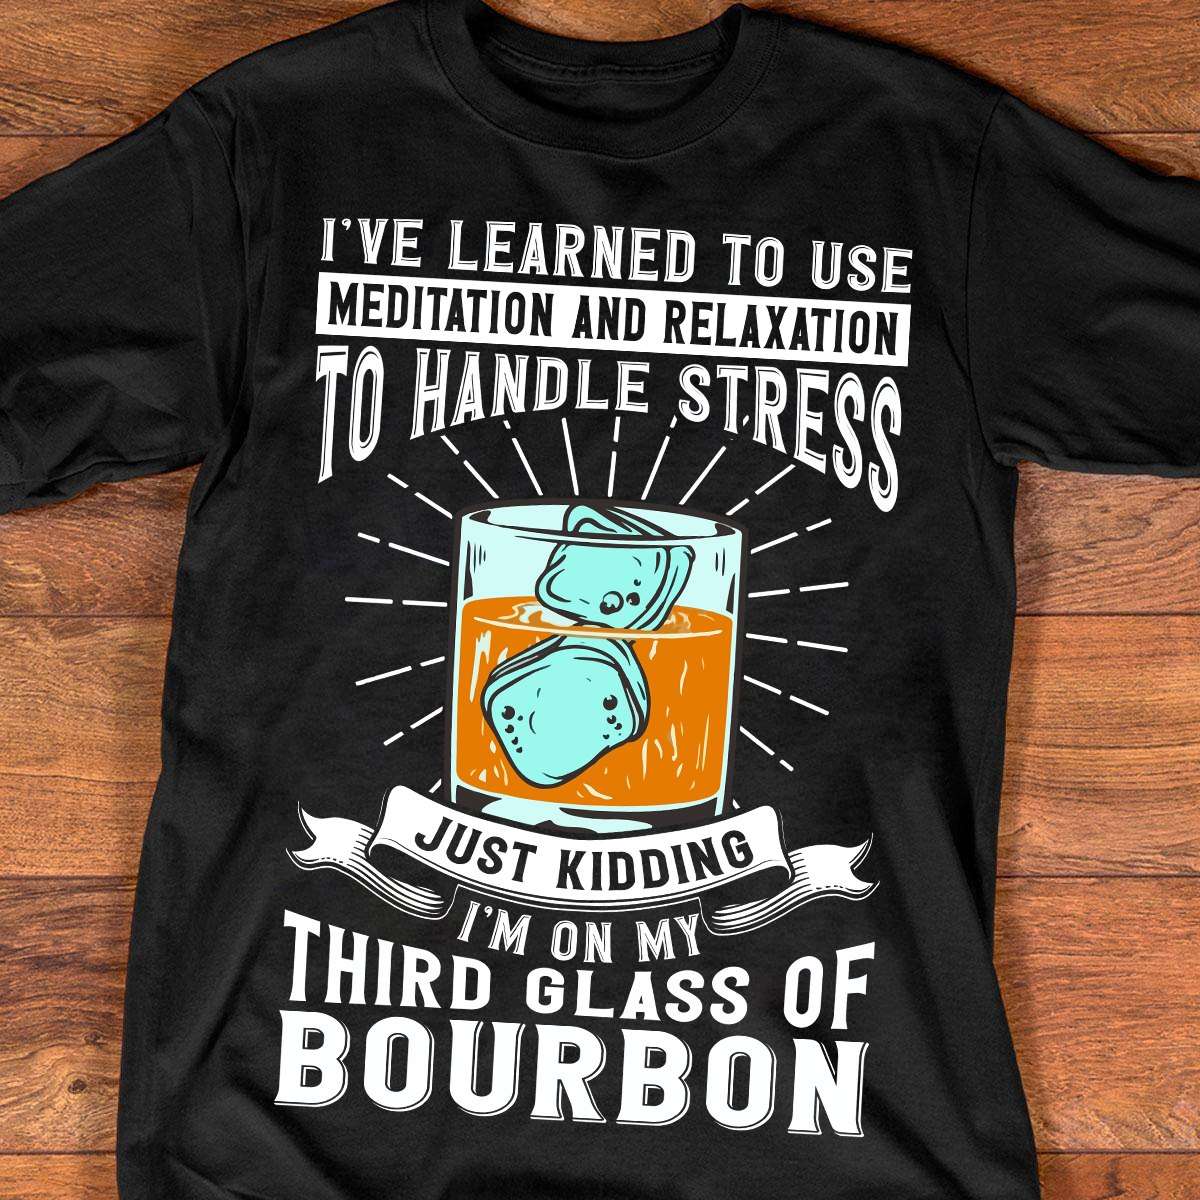 Glass Of Bourbon - I've learned to use meditation and relaxation to handle stress just kidding